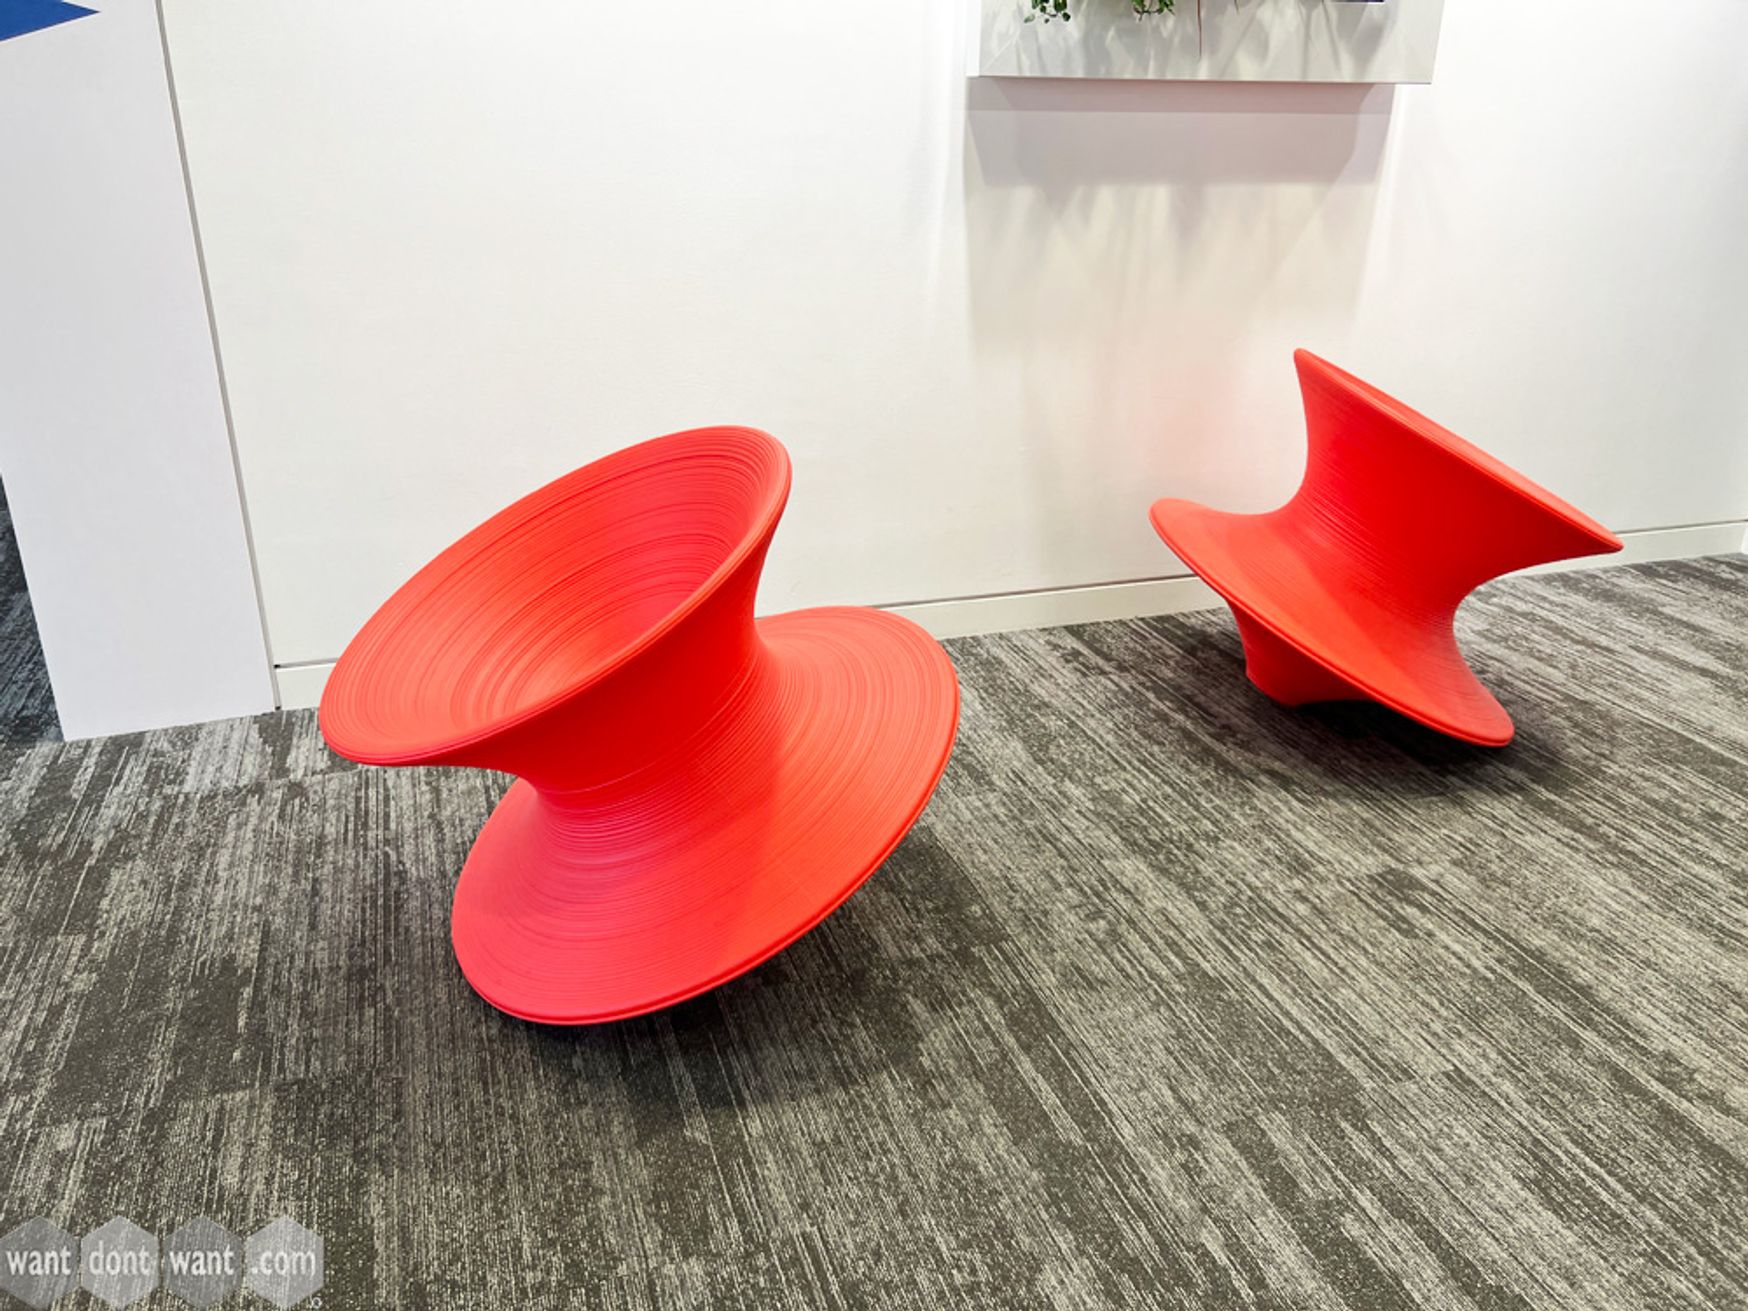 Used Magis 'Spun' chair in red rotational-moulded polythene.